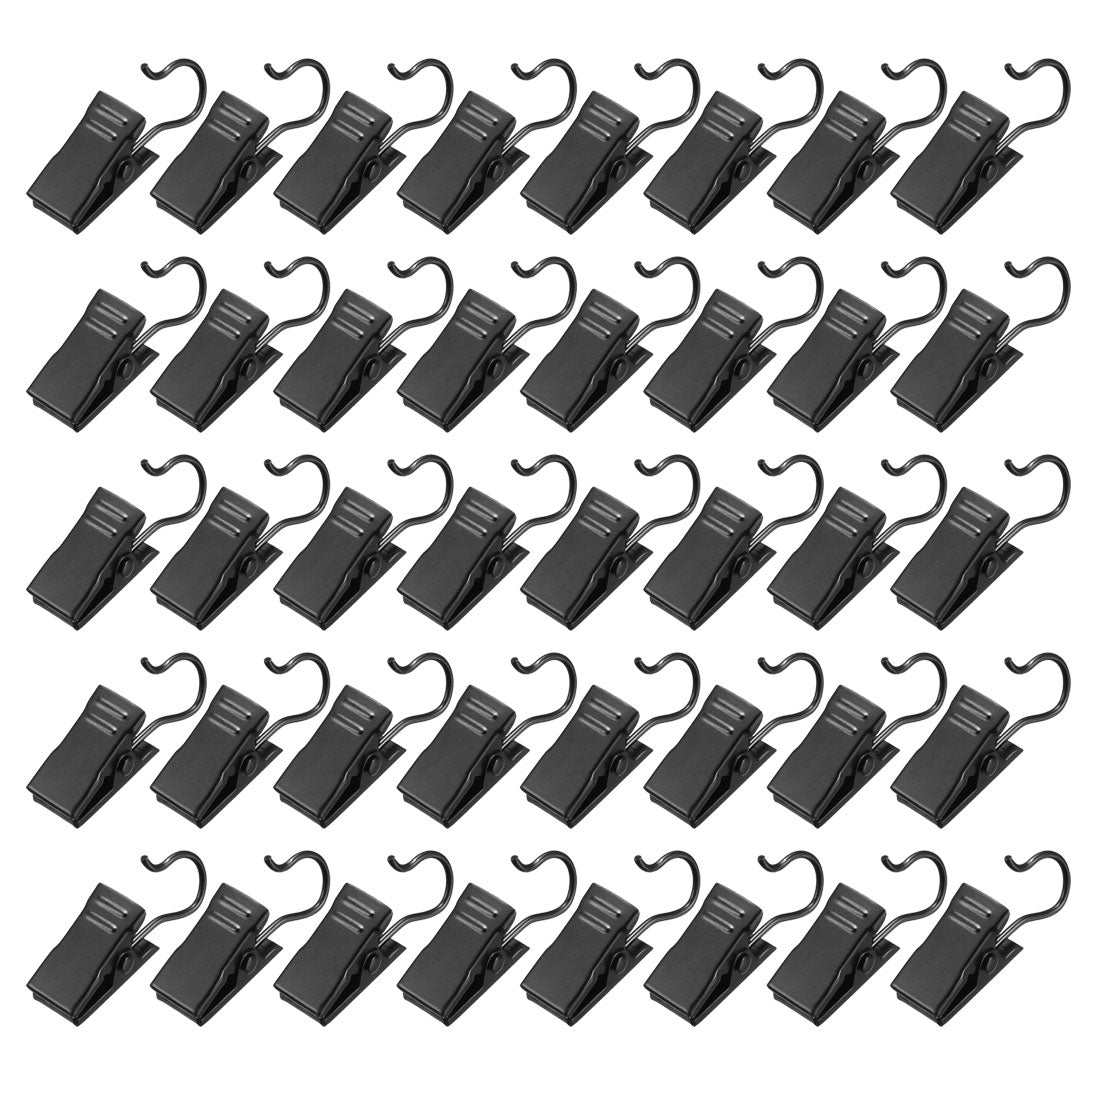 uxcell Uxcell Curtain Clip Hook Set Clips for Curtain Photos Home Decoration Art Craft Display 0.71"*0.35" Black 40pcs